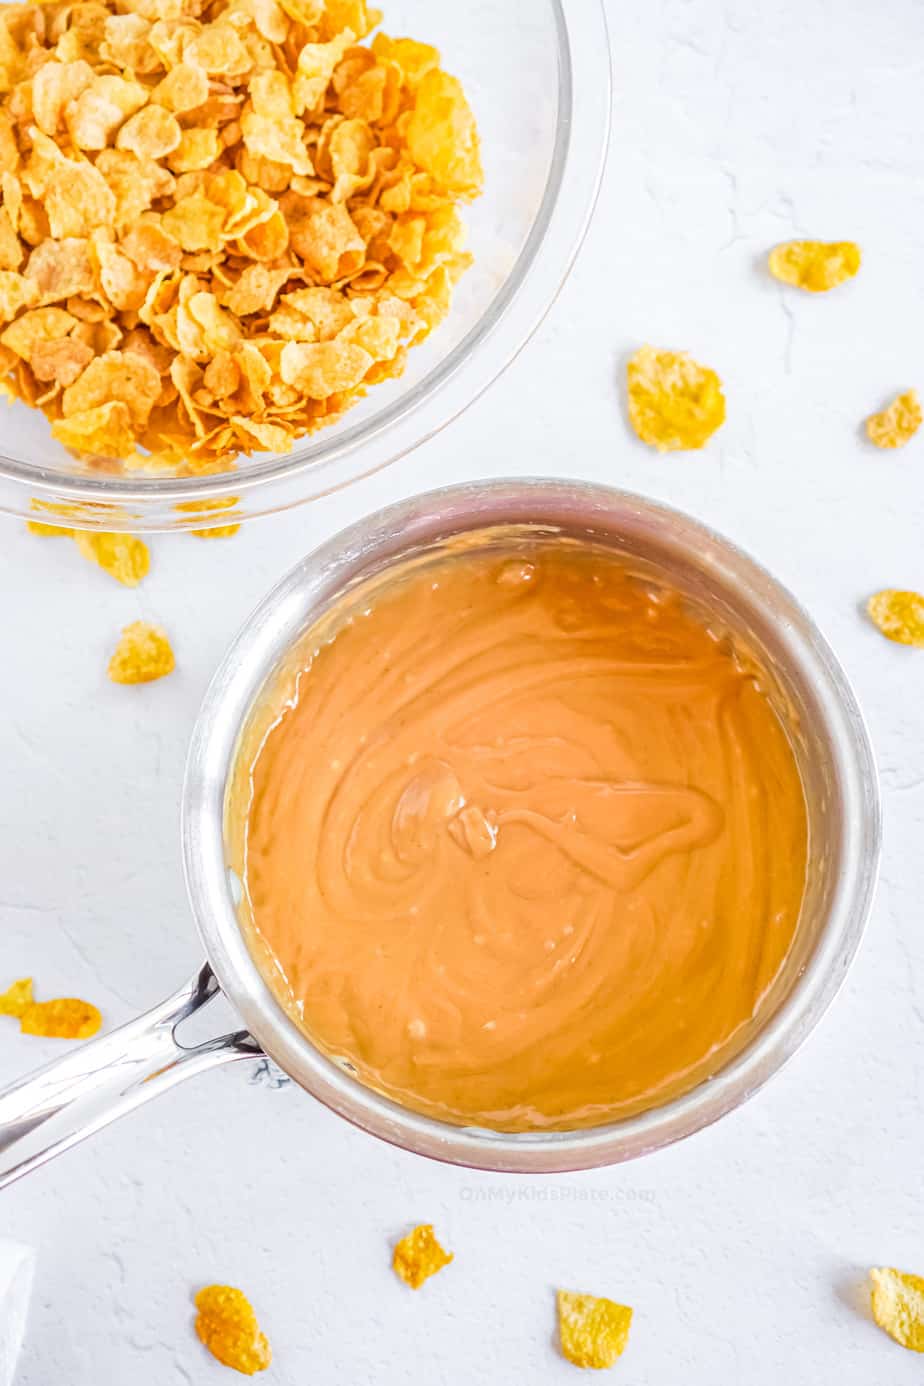 Peanut butter mixture melted in pan with cornflakes in a bowl next to it